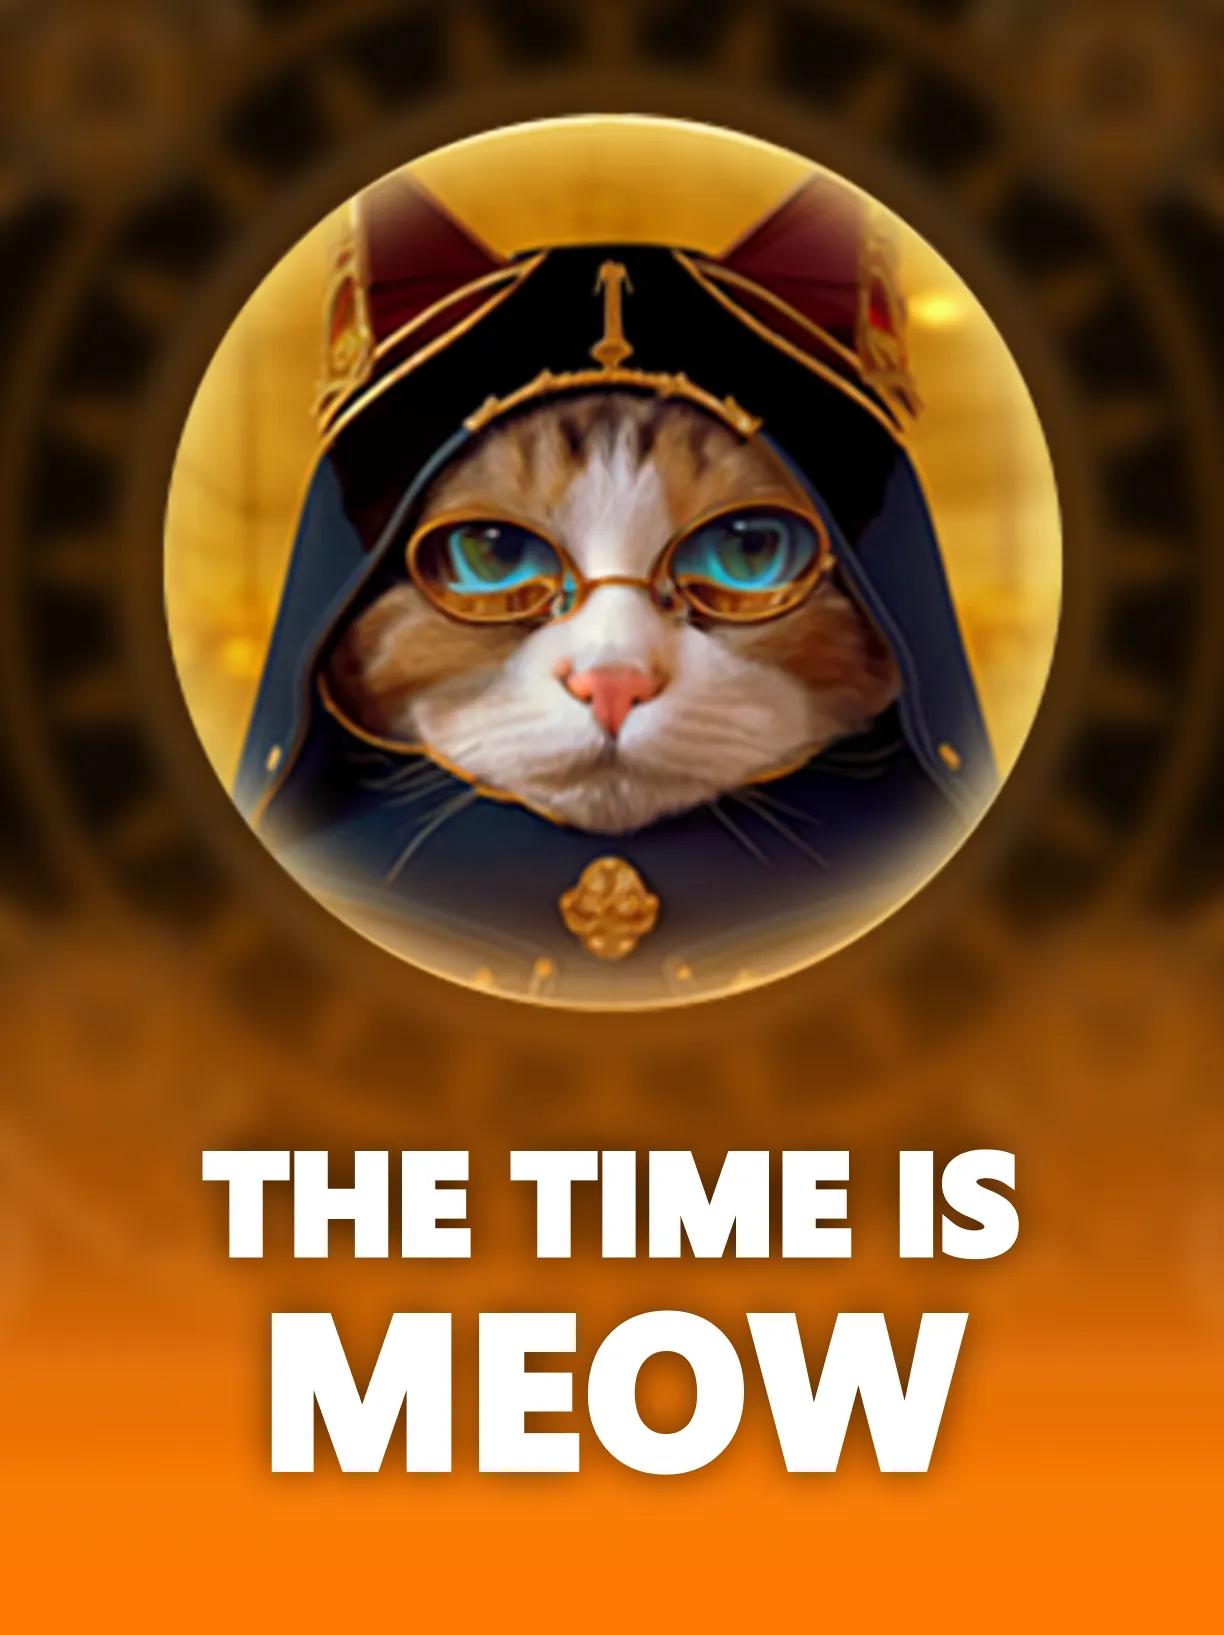 ug_The_Time_Is_Meow!_square.webp